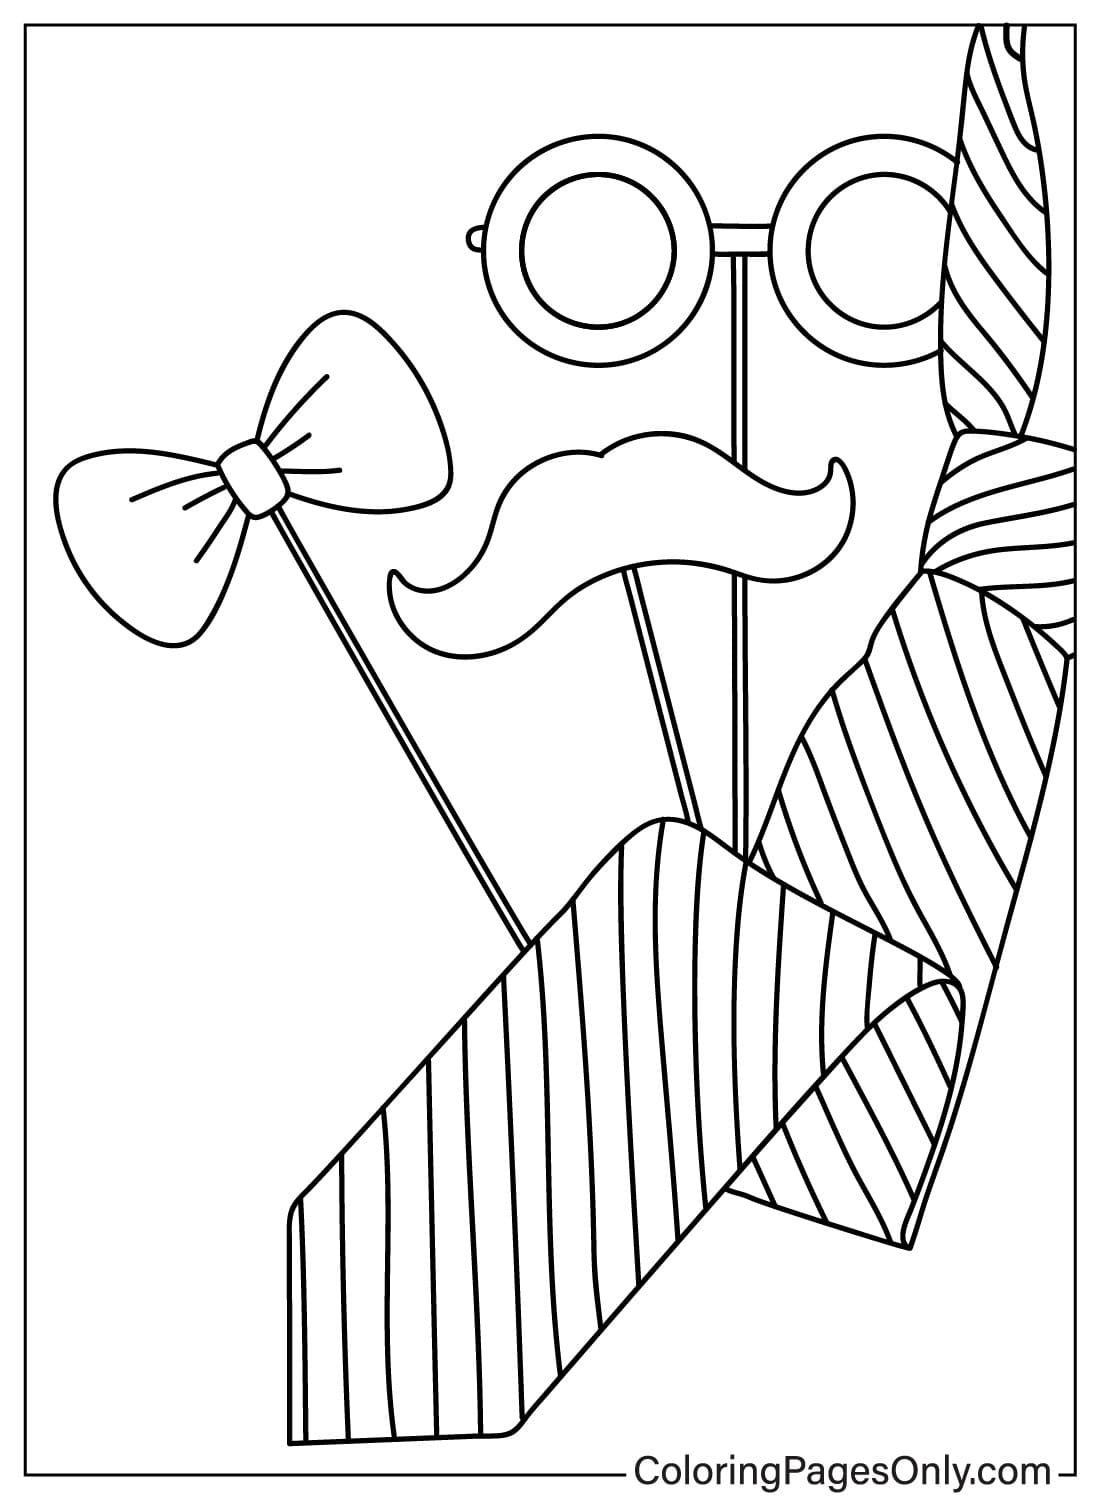 Tie Coloring Page to Print from Tie